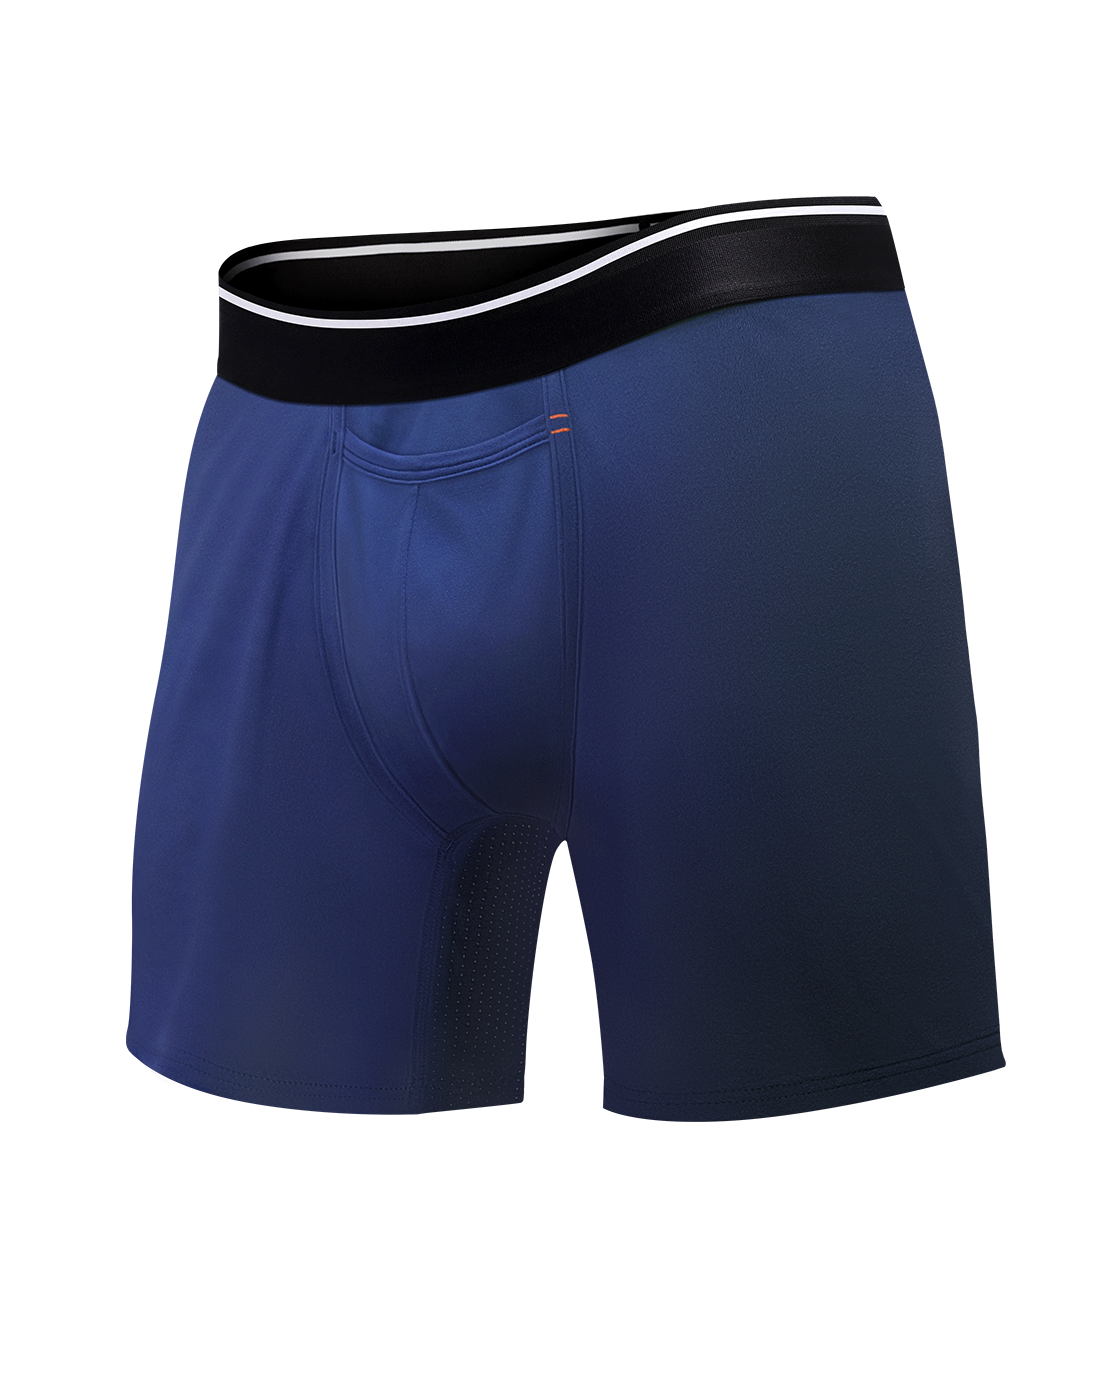 Classic Boxer Brief with Fly: Navy